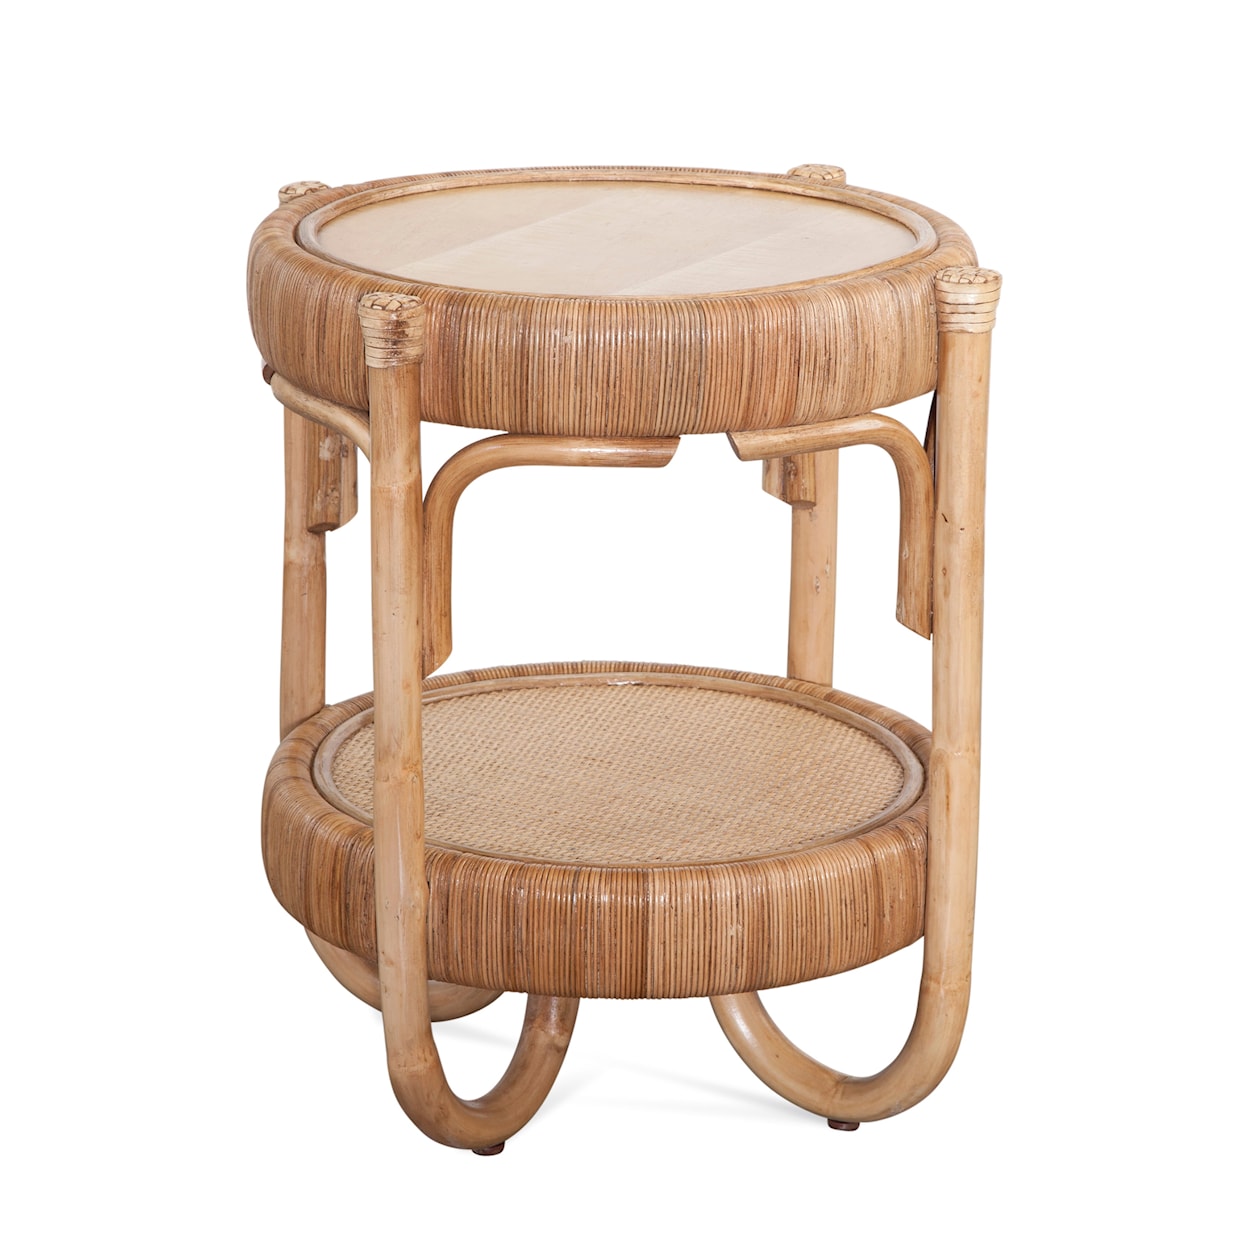 Braxton Culler Willow Creek Chairside Table